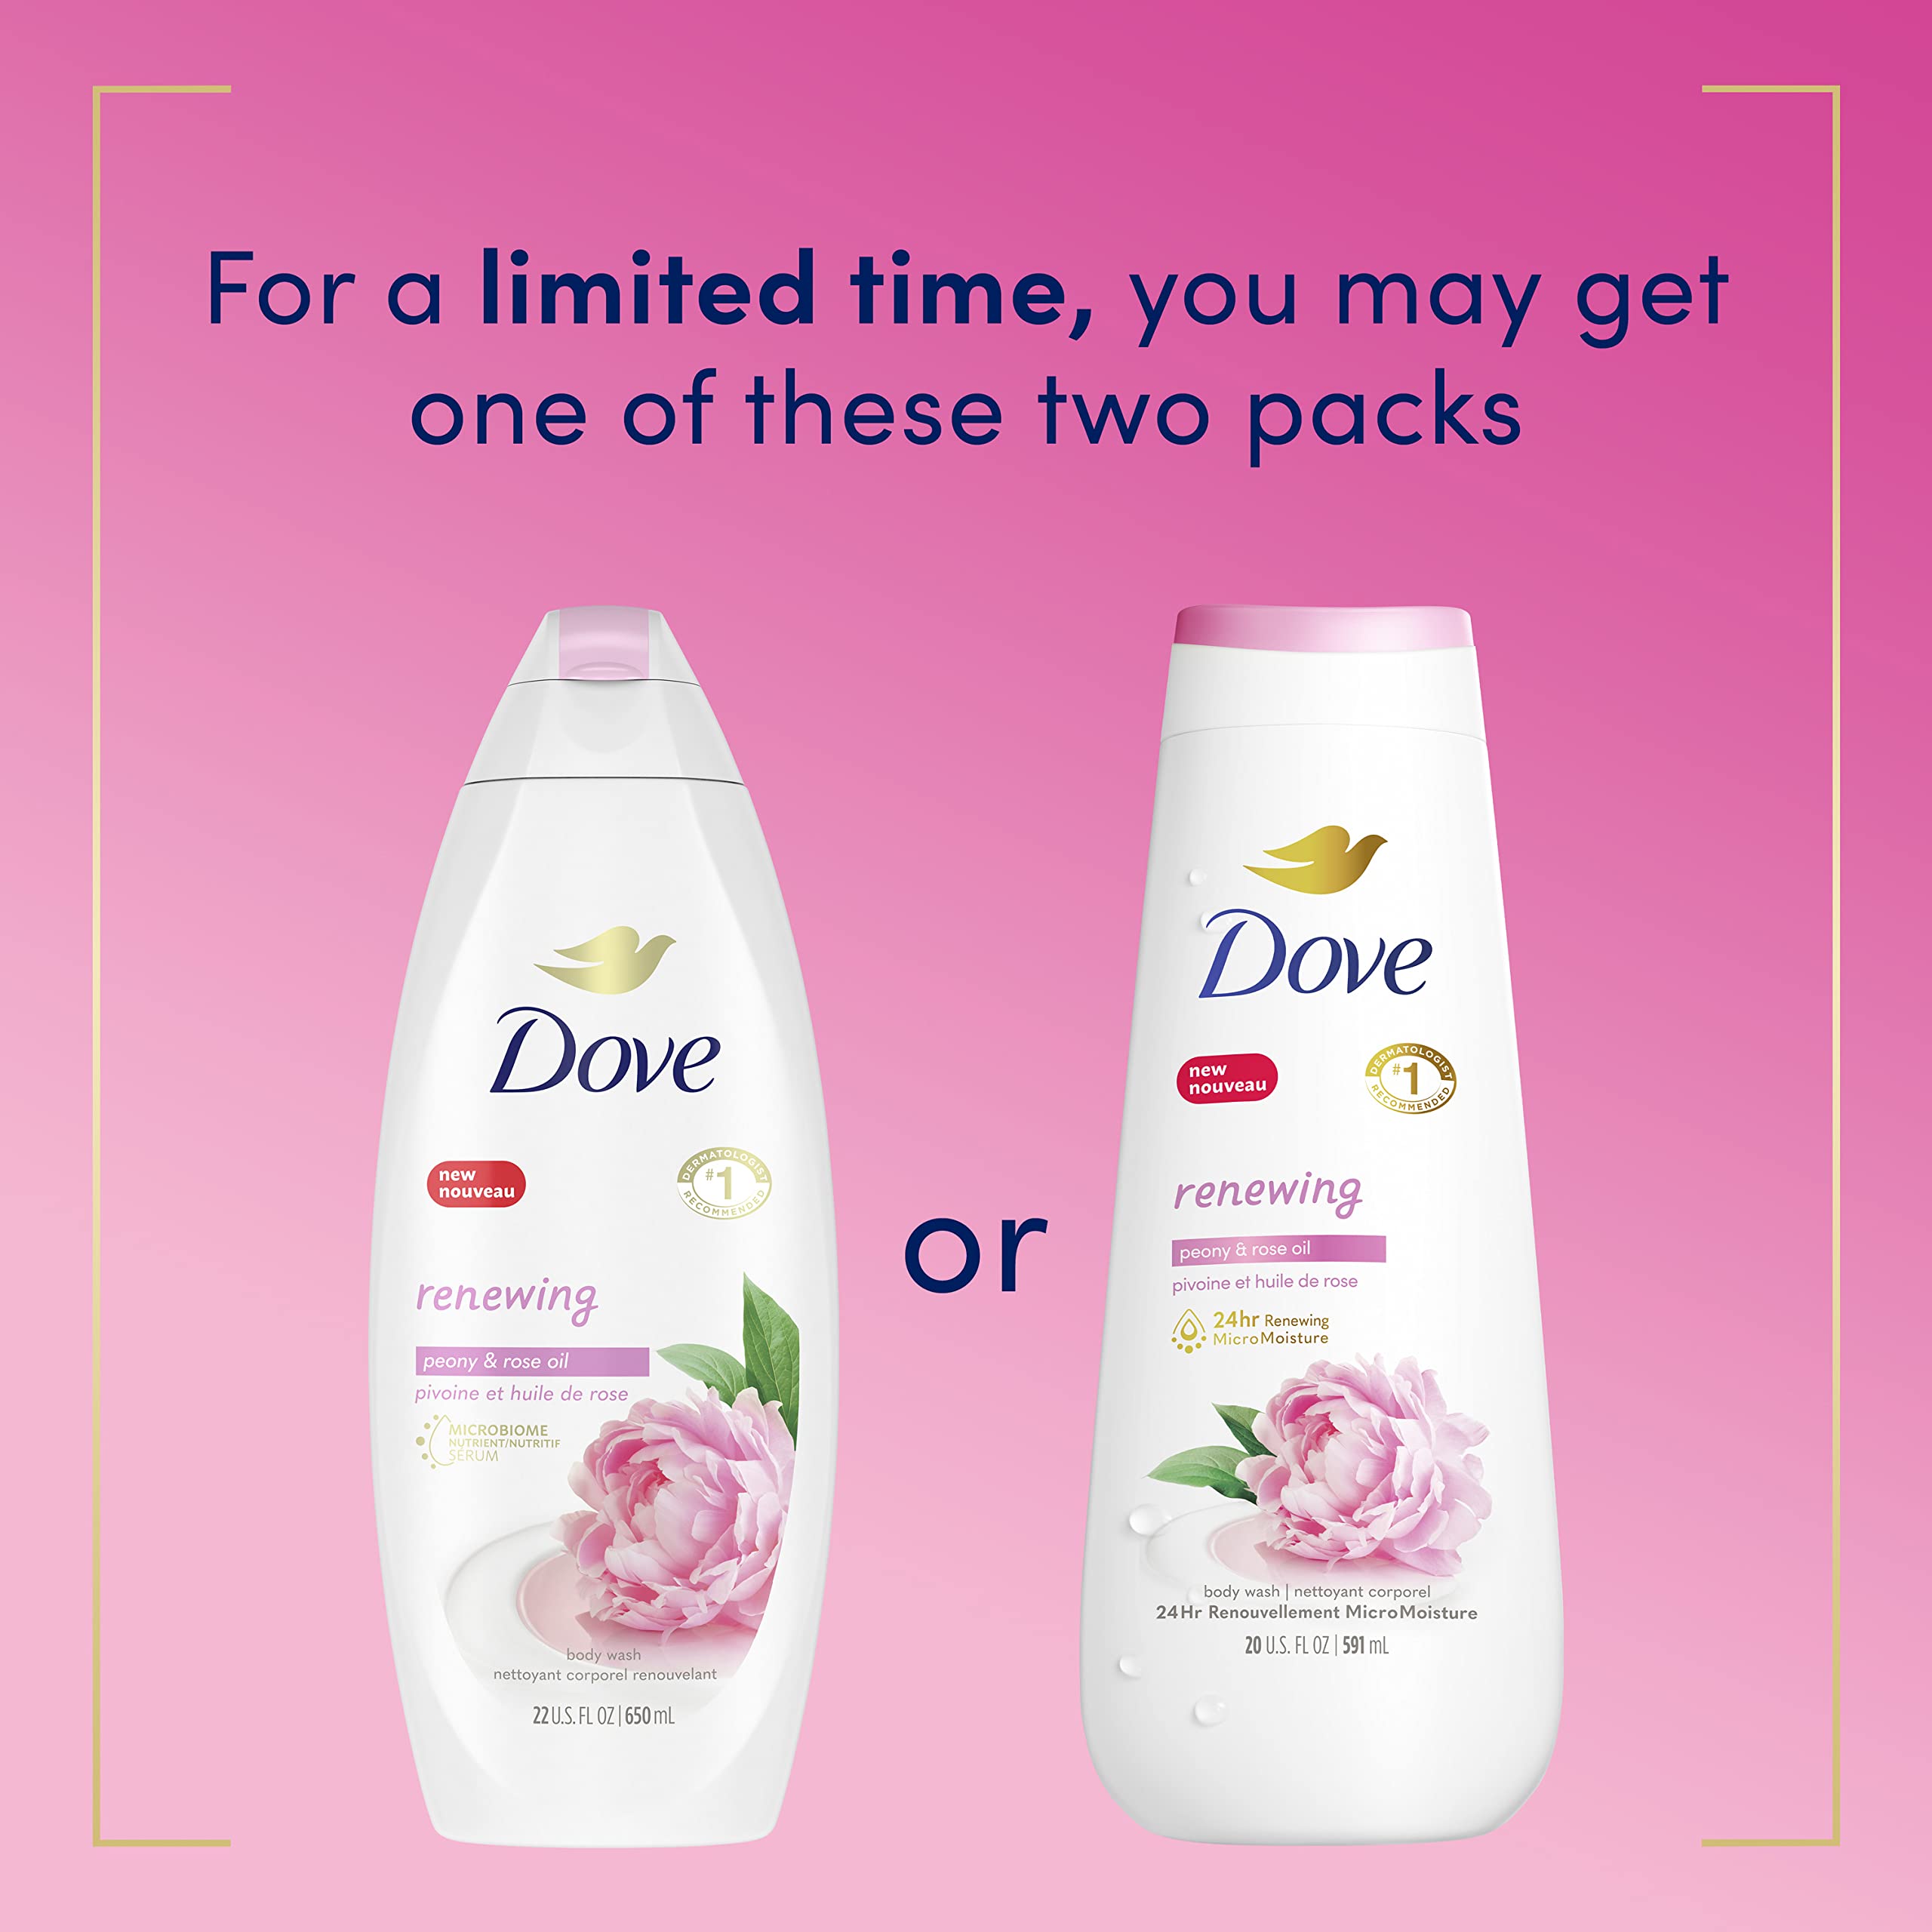 Dove Body Wash Renewing Peony and Rose Oil for Renewed, Healthy-Looking Skin Gentle Skin Cleanser with 24hr Renewing MicroMoisture 20 oz